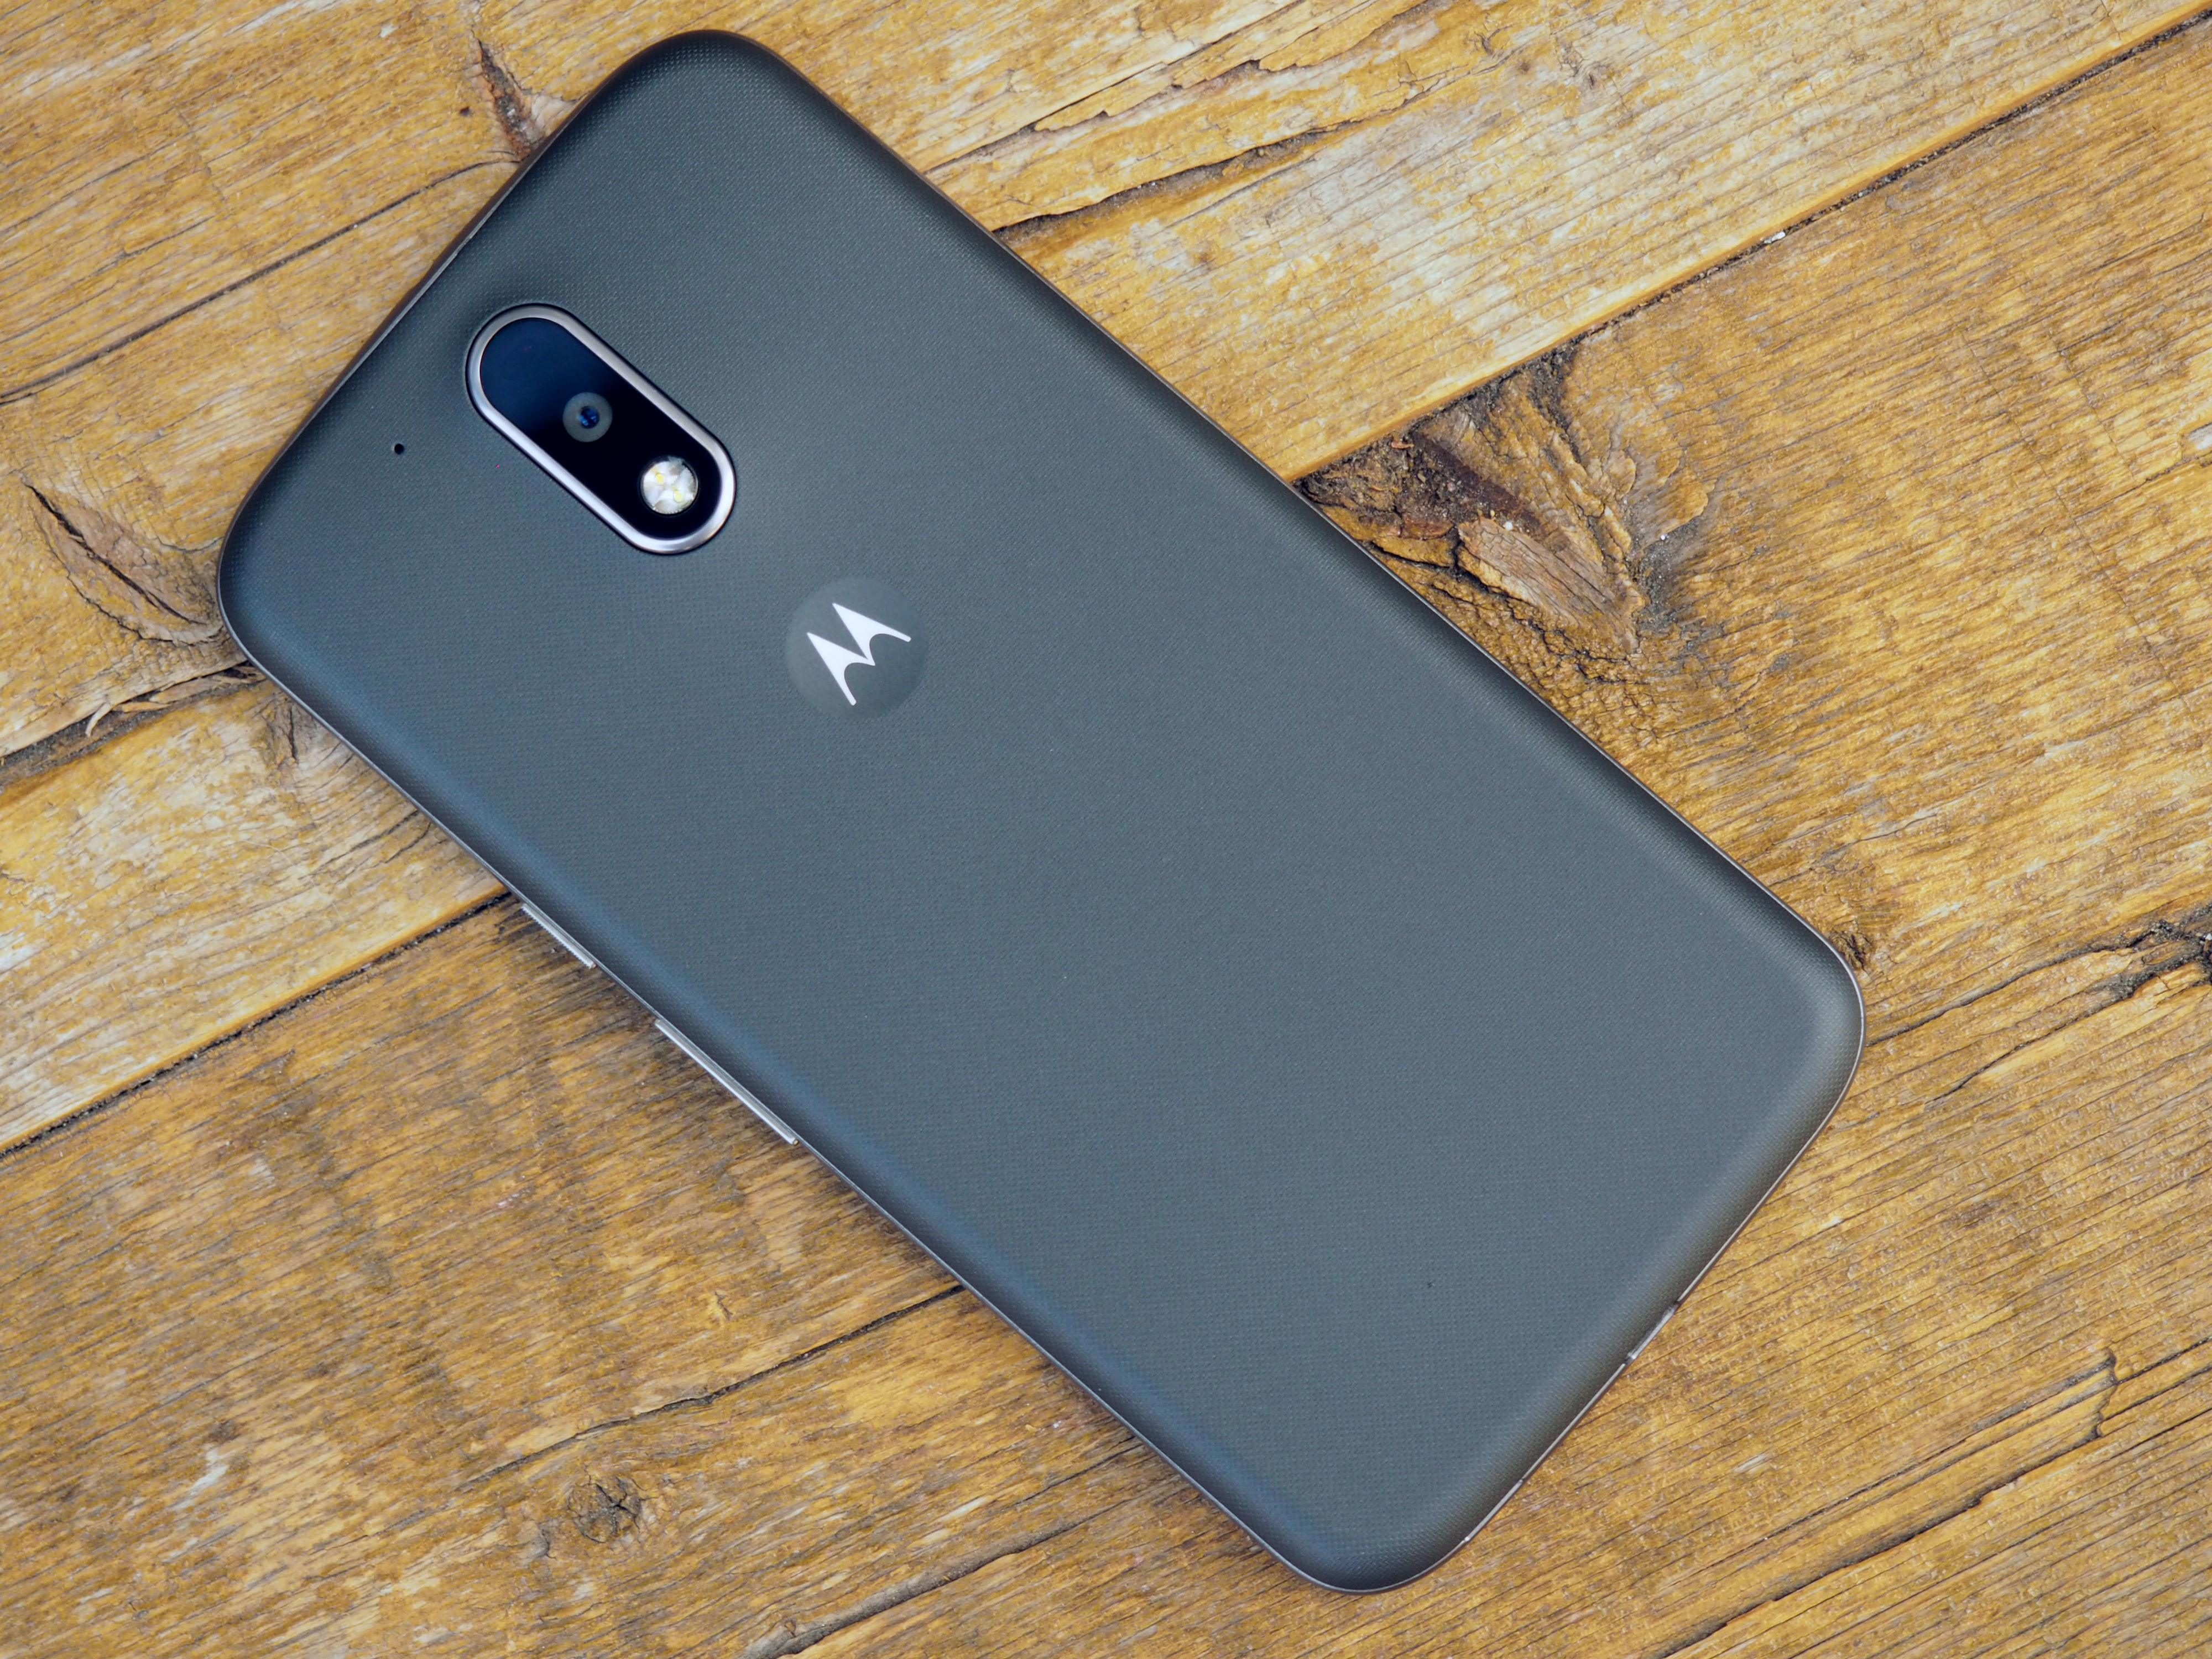 Moto G4 vs Moto G4 Plus: What's the difference and which should you buy?